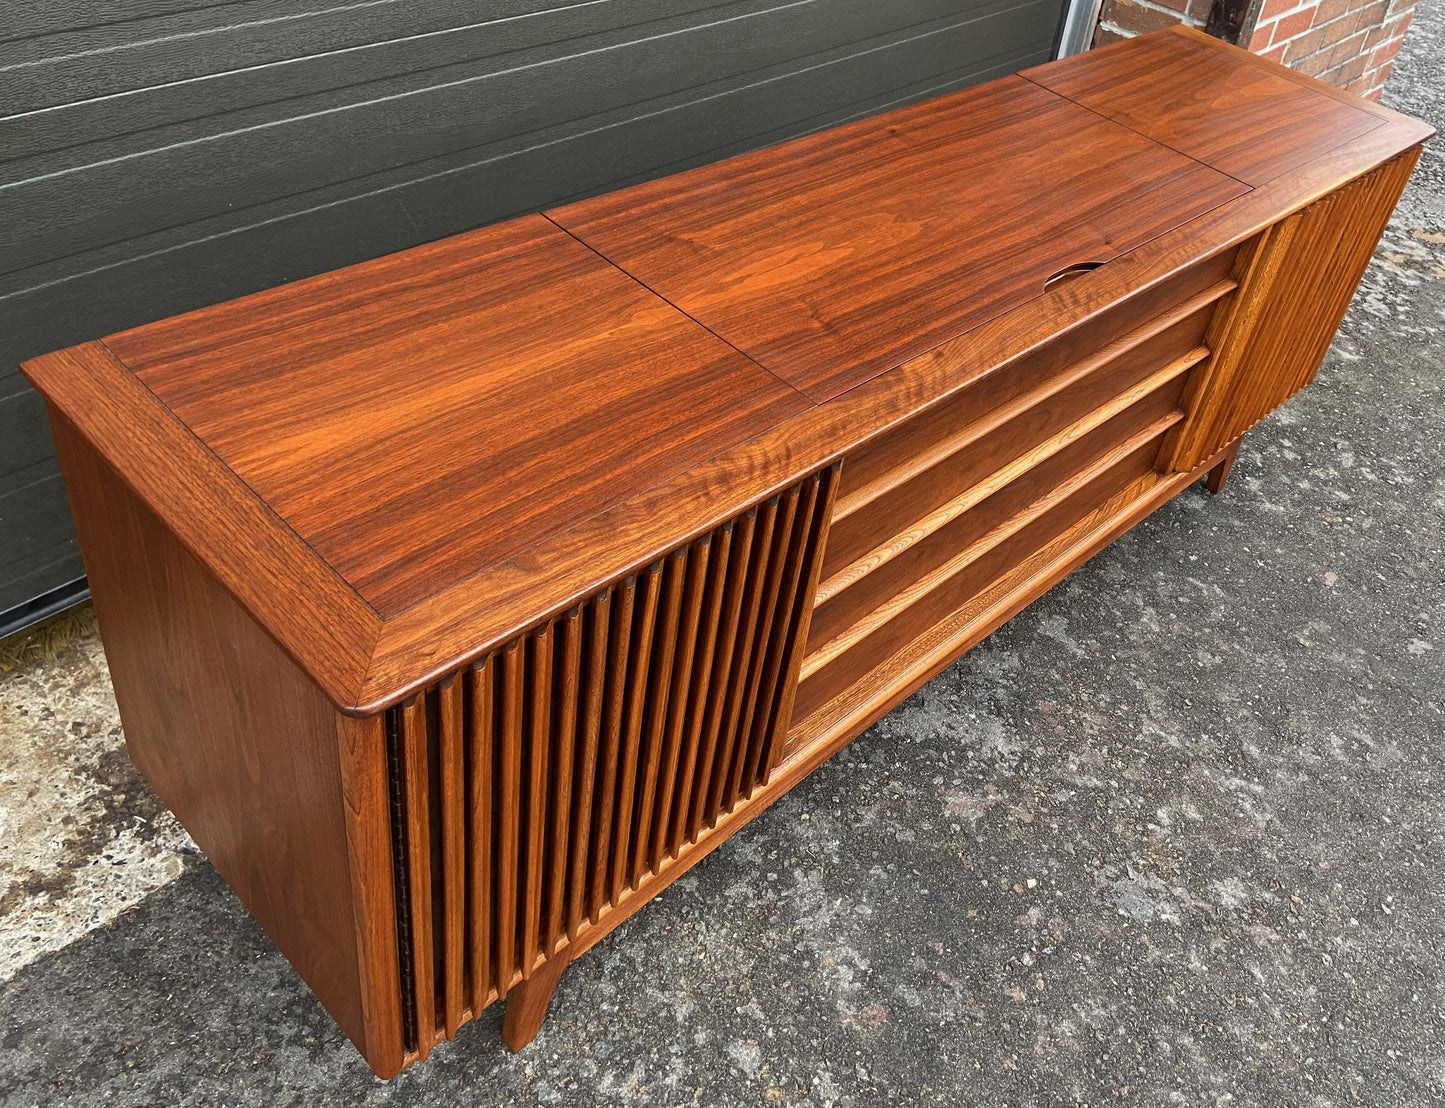 REFINISHED Mid Century Modern Walnut Media Record Player Console 74.5"